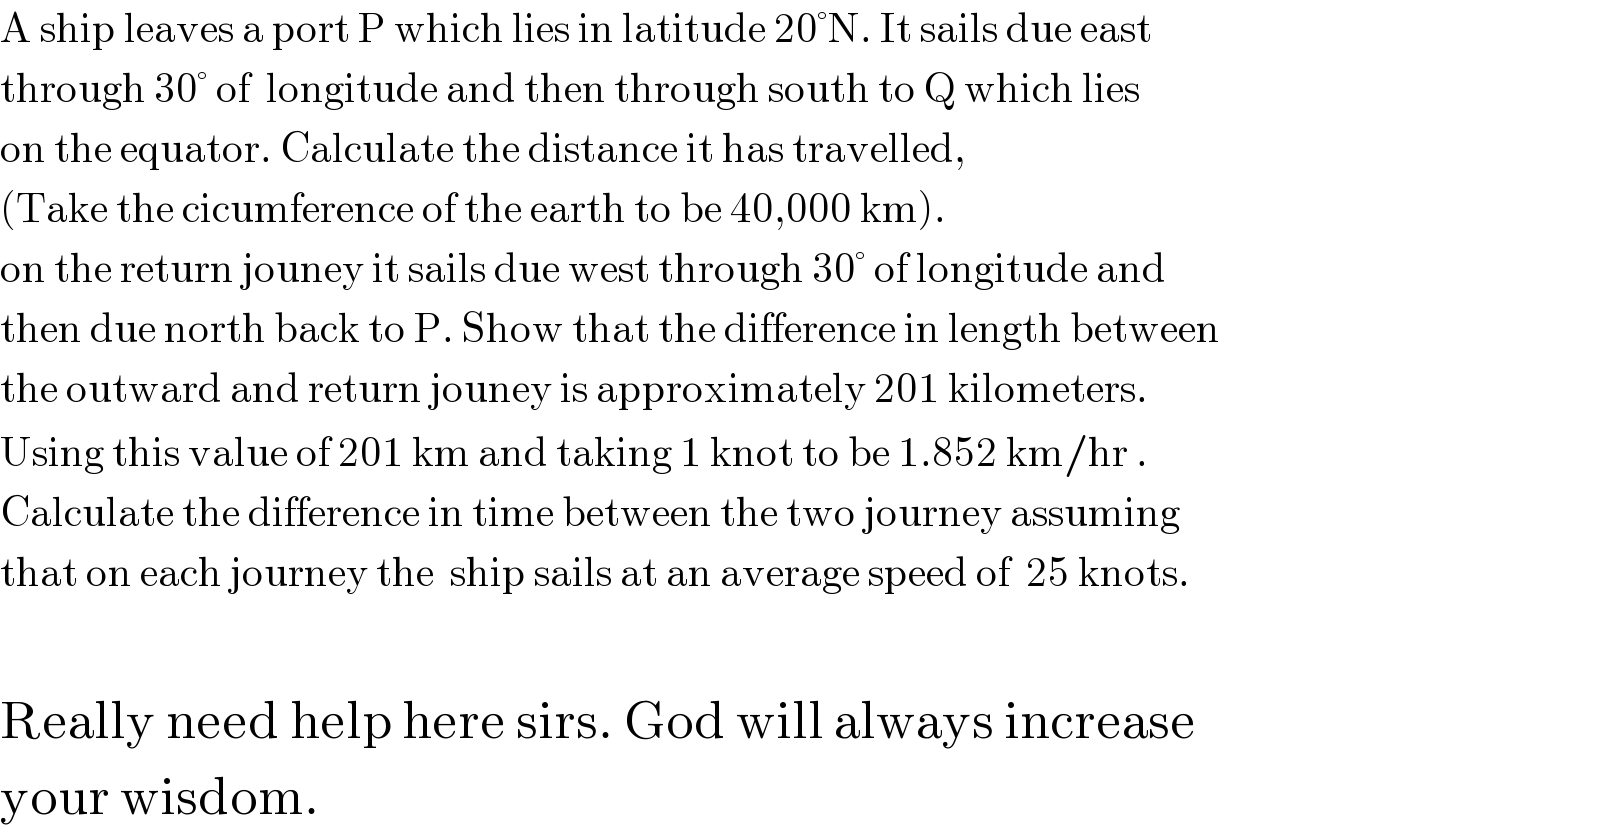 A ship leaves a port P which lies in latitude 20°N. It sails due east  through 30° of  longitude and then through south to Q which lies  on the equator. Calculate the distance it has travelled,  (Take the cicumference of the earth to be 40,000 km).  on the return jouney it sails due west through 30° of longitude and  then due north back to P. Show that the difference in length between  the outward and return jouney is approximately 201 kilometers.  Using this value of 201 km and taking 1 knot to be 1.852 km/hr .  Calculate the difference in time between the two journey assuming  that on each journey the  ship sails at an average speed of  25 knots.    Really need help here sirs. God will always increase   your wisdom.  